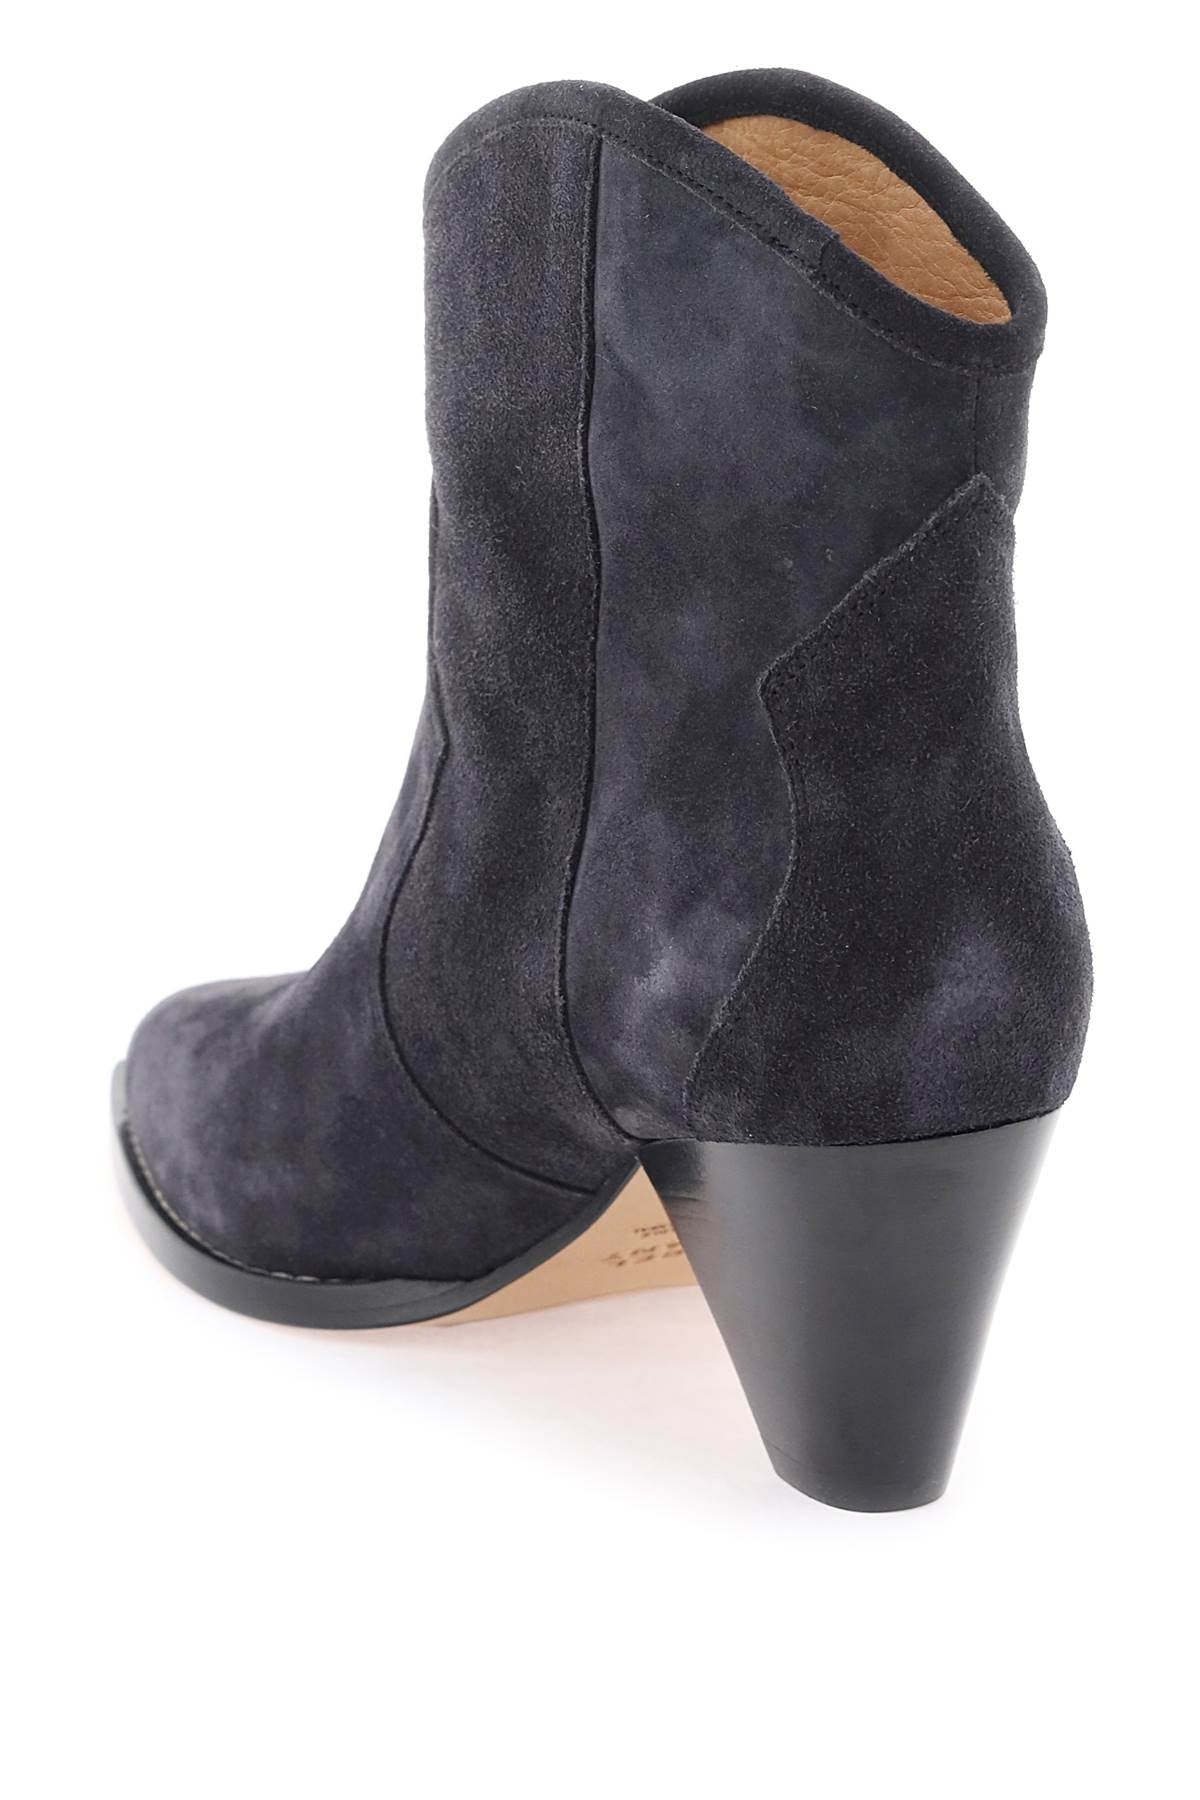 Isabel marant 'darizo' suede ankle-boots